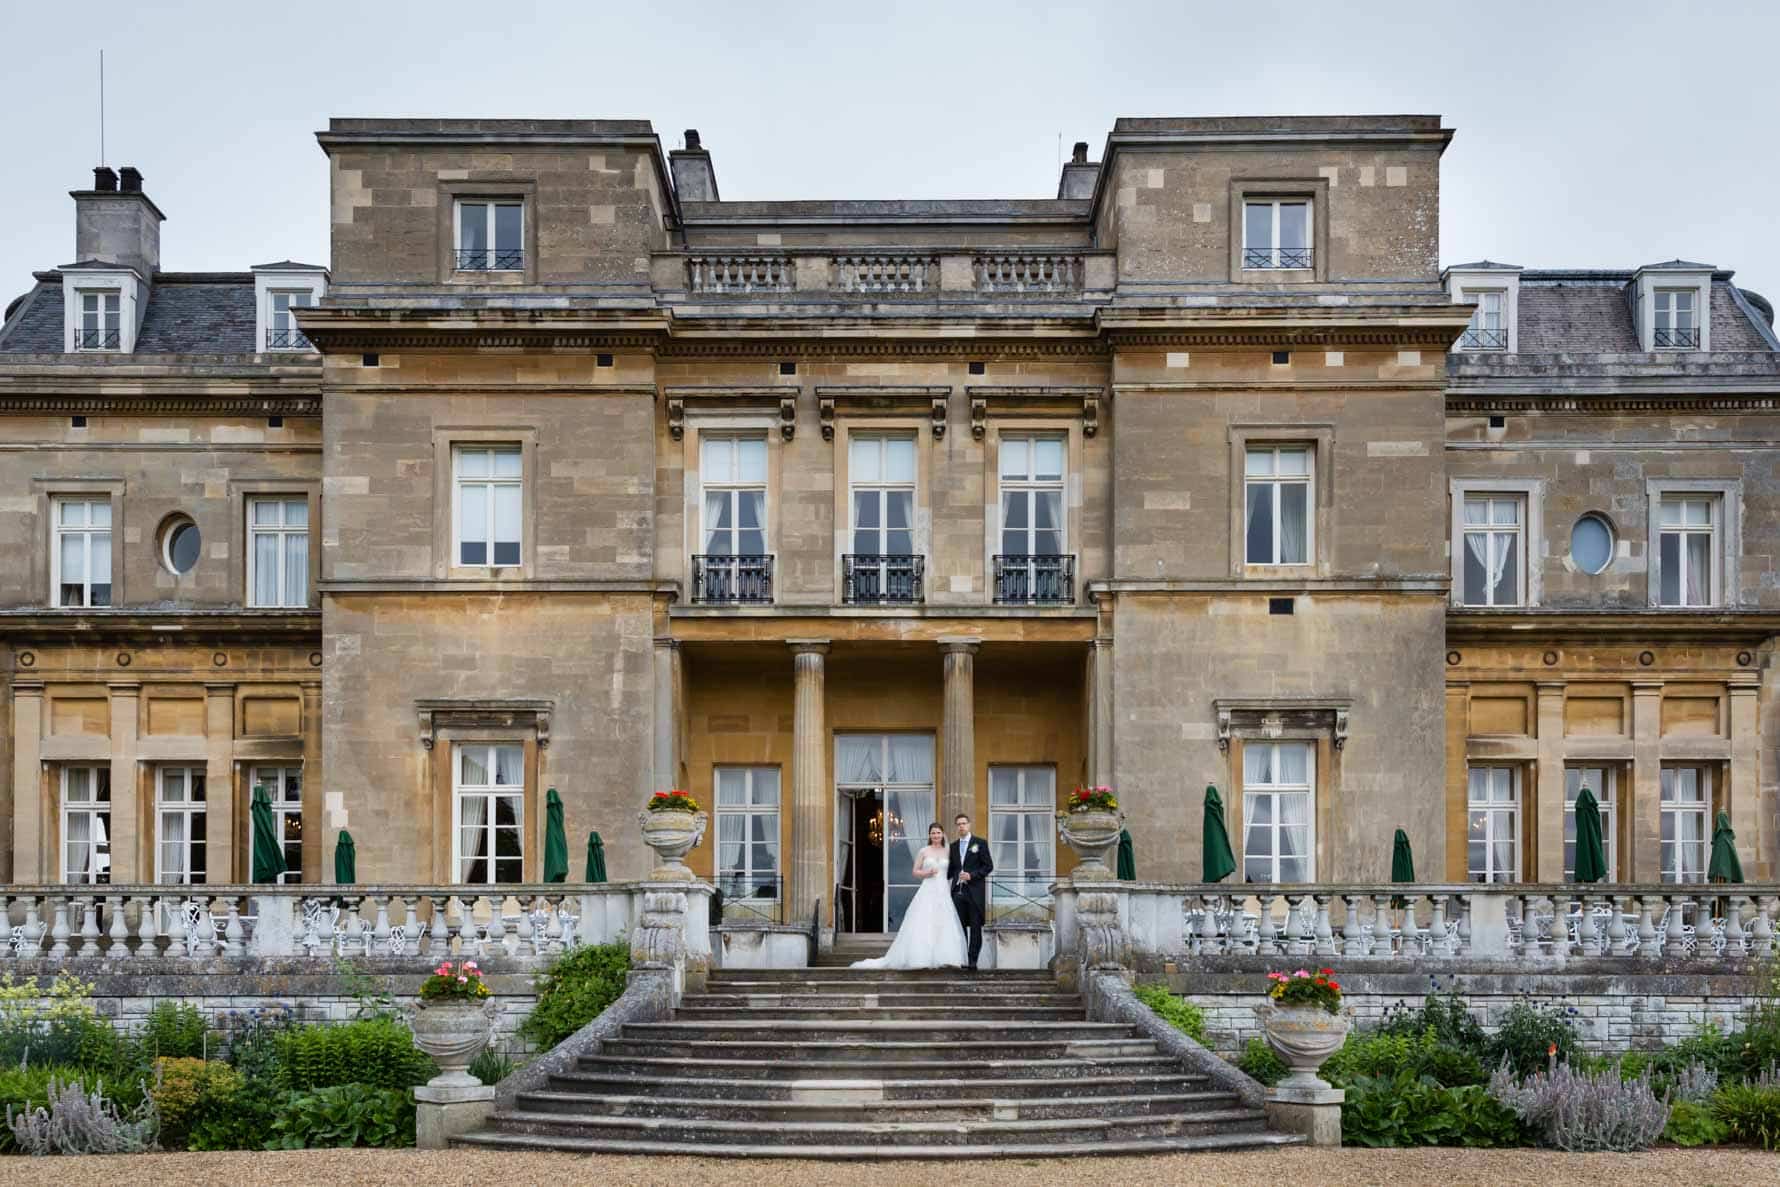 Bride and groom on steps at Luton Hoo wedding in Bedfordshire